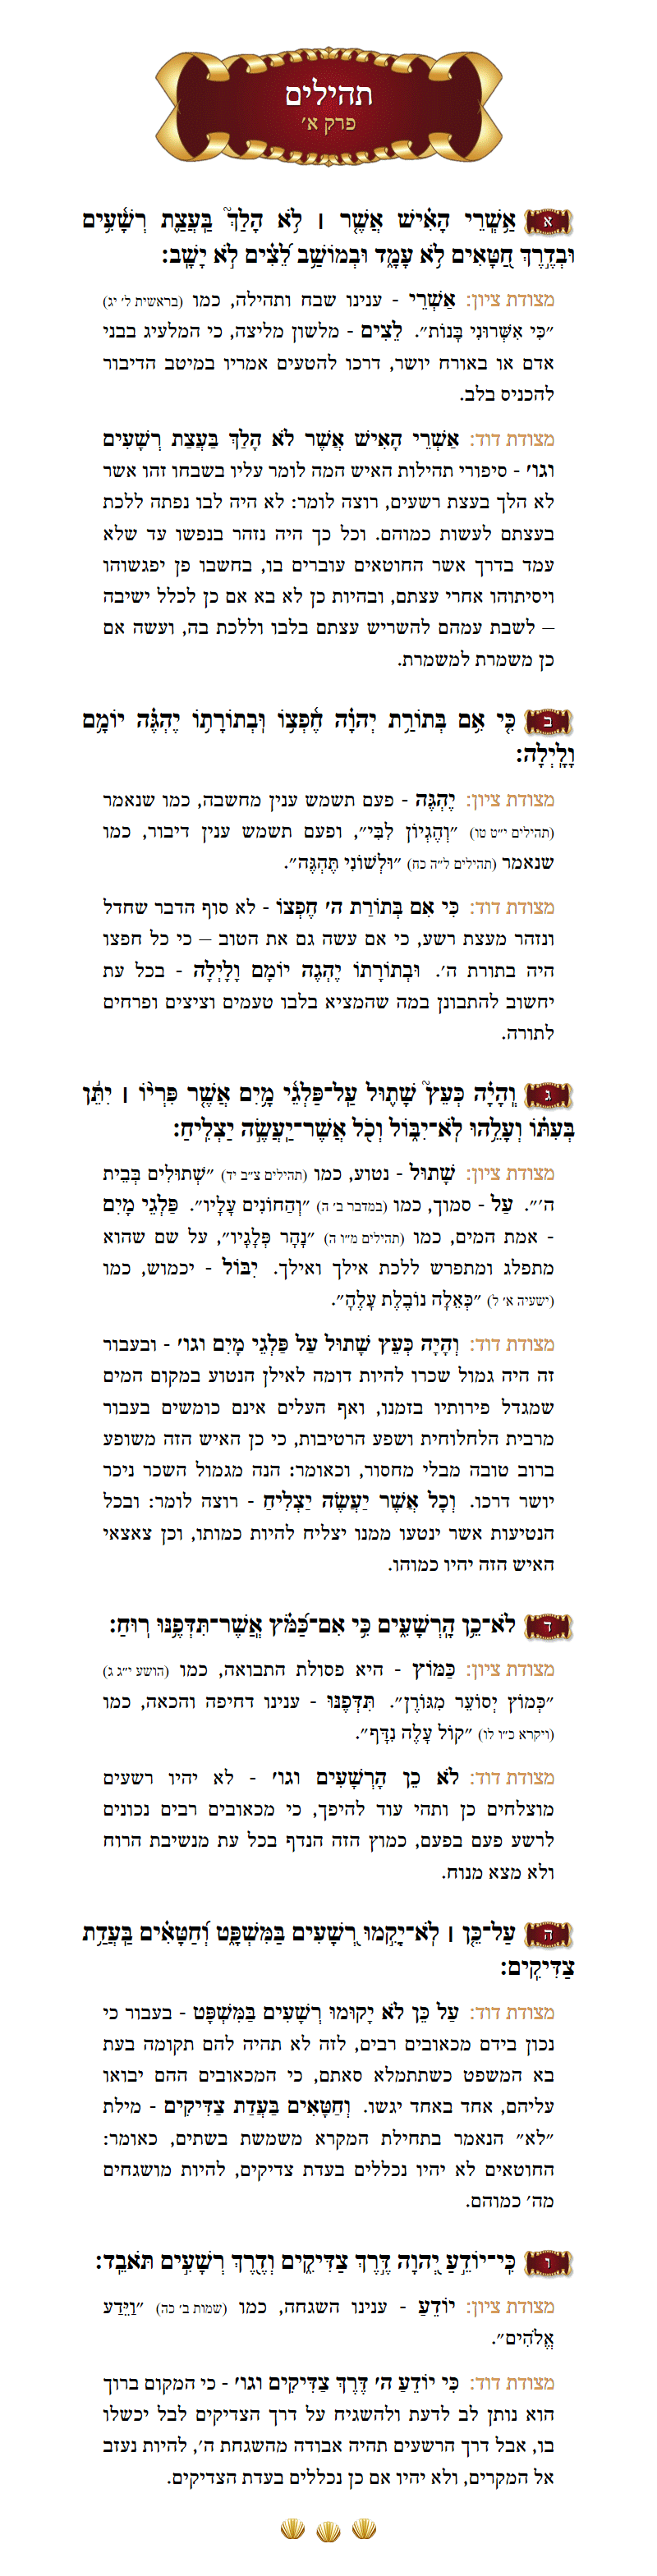 Sefer Tehillim Chapter 1 with commentary